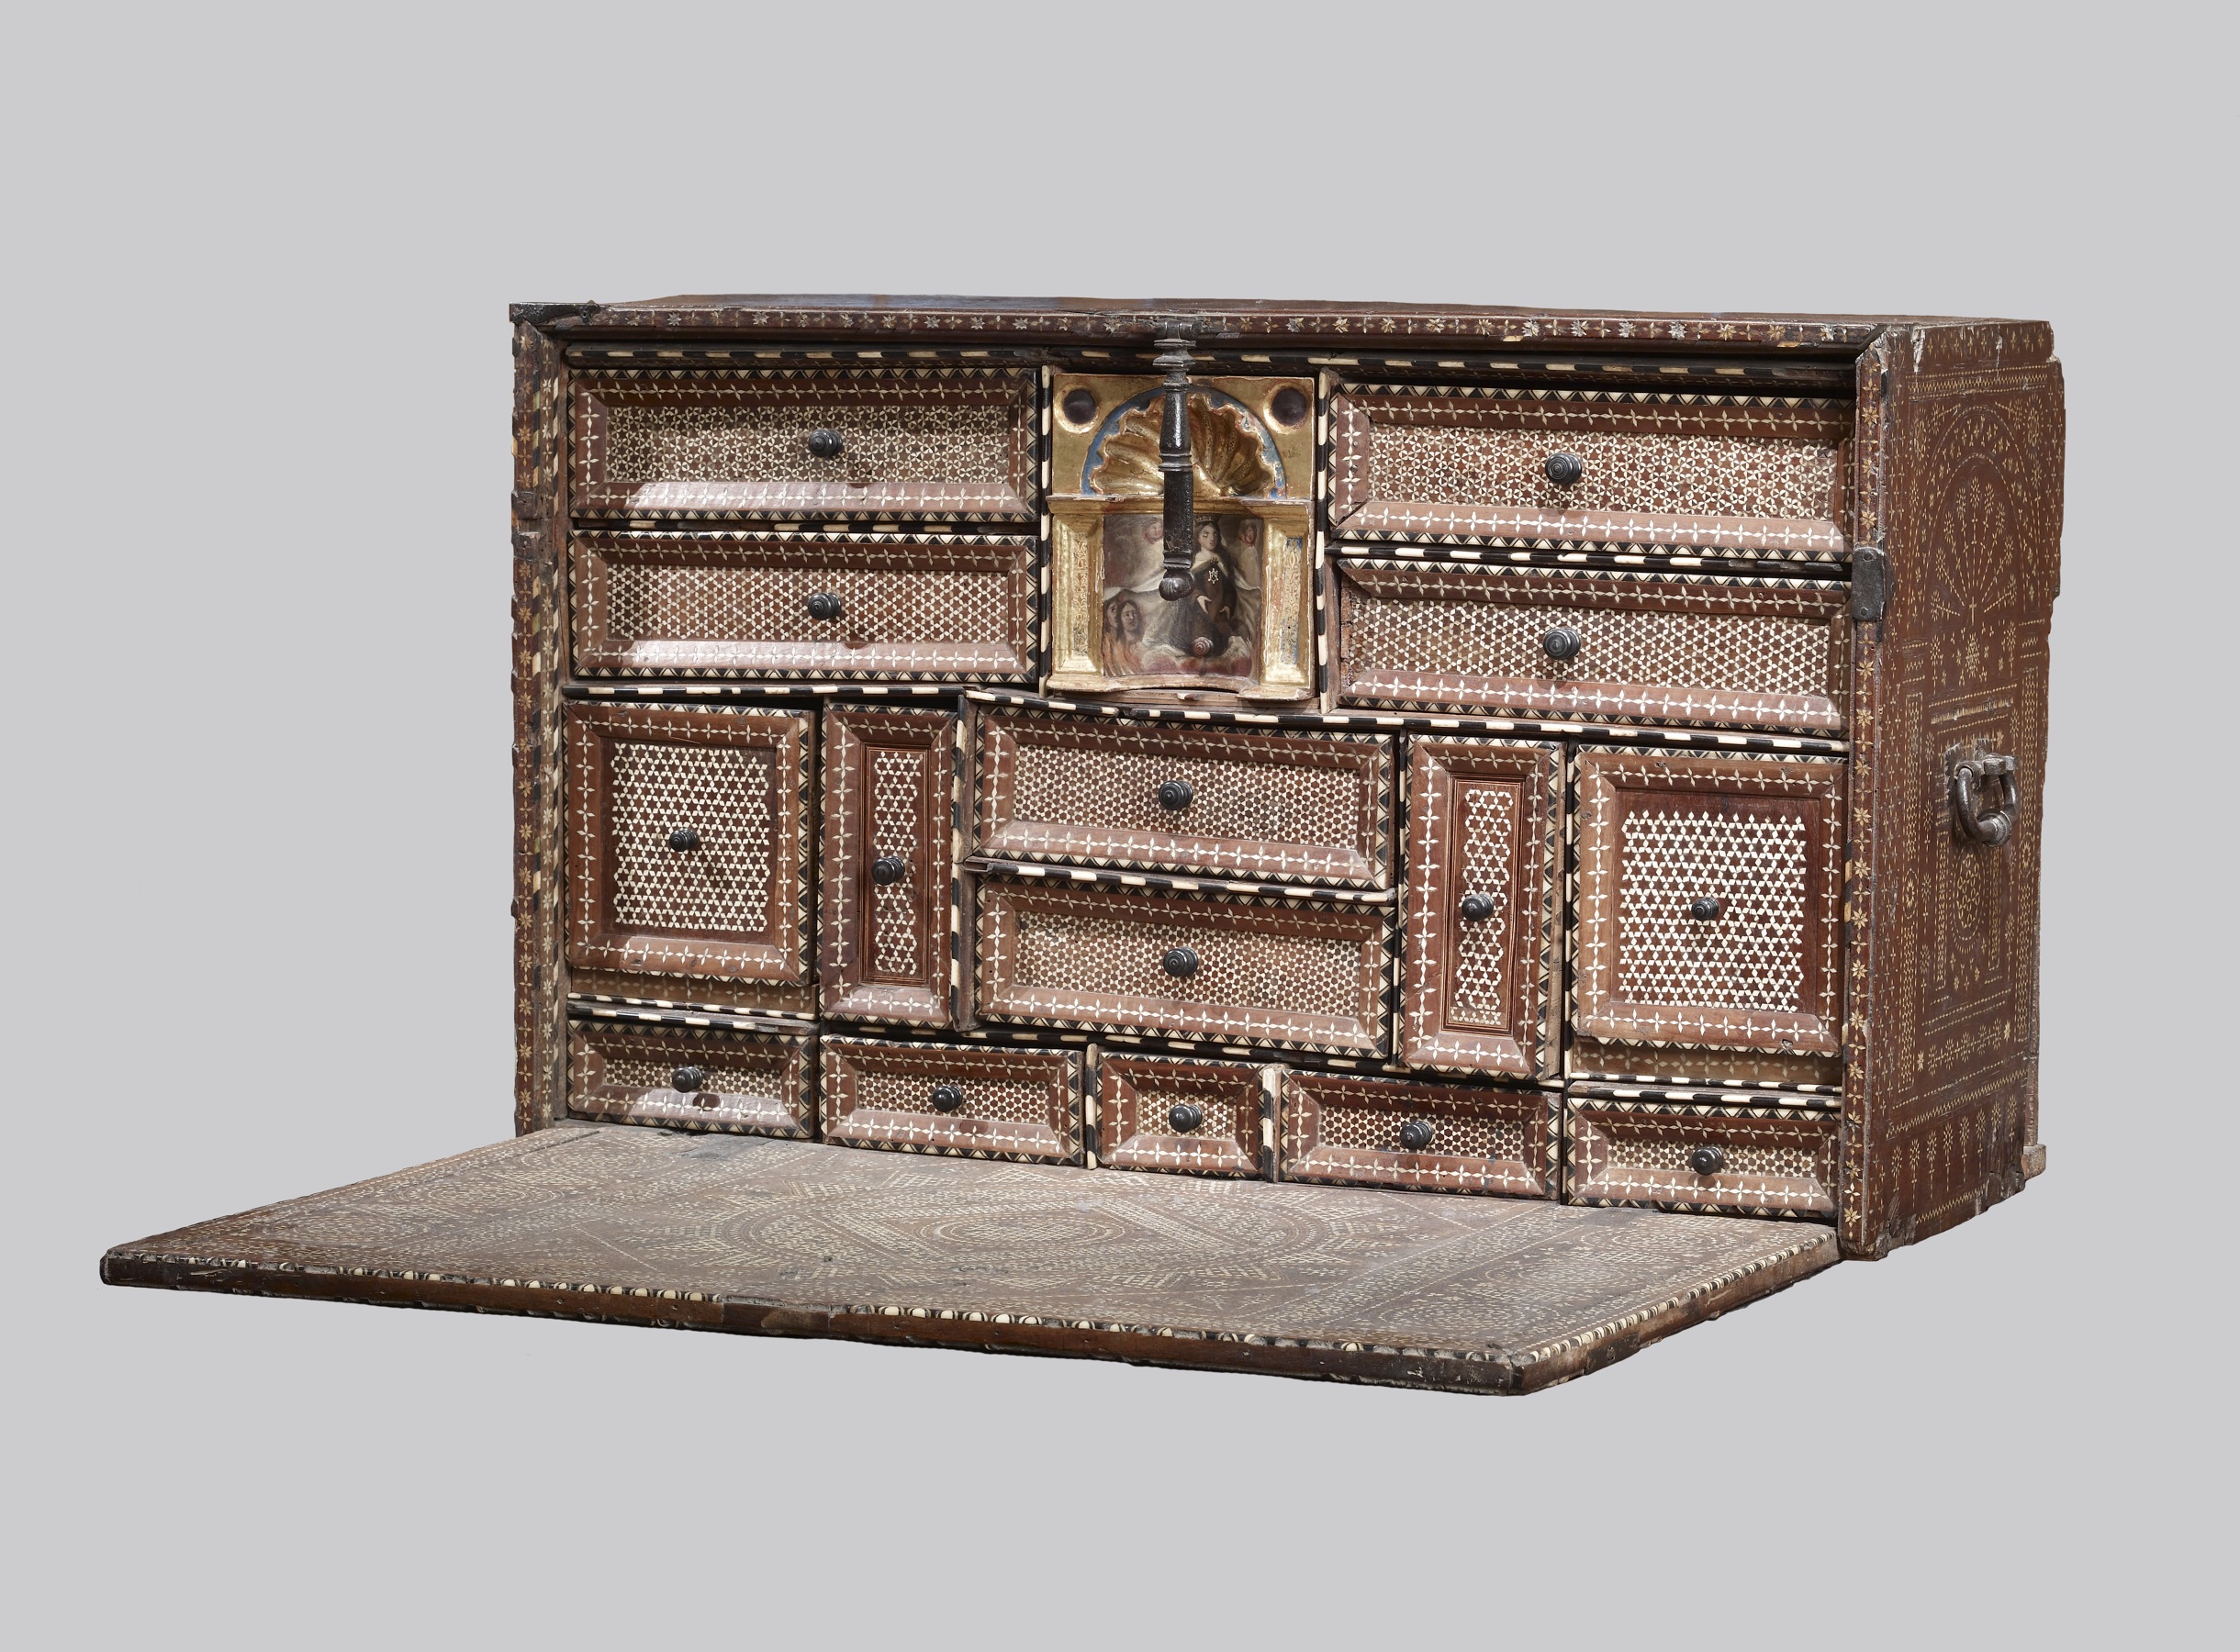 Image for Portable Writing Desk with Geometric Patterns and Moorish Designs